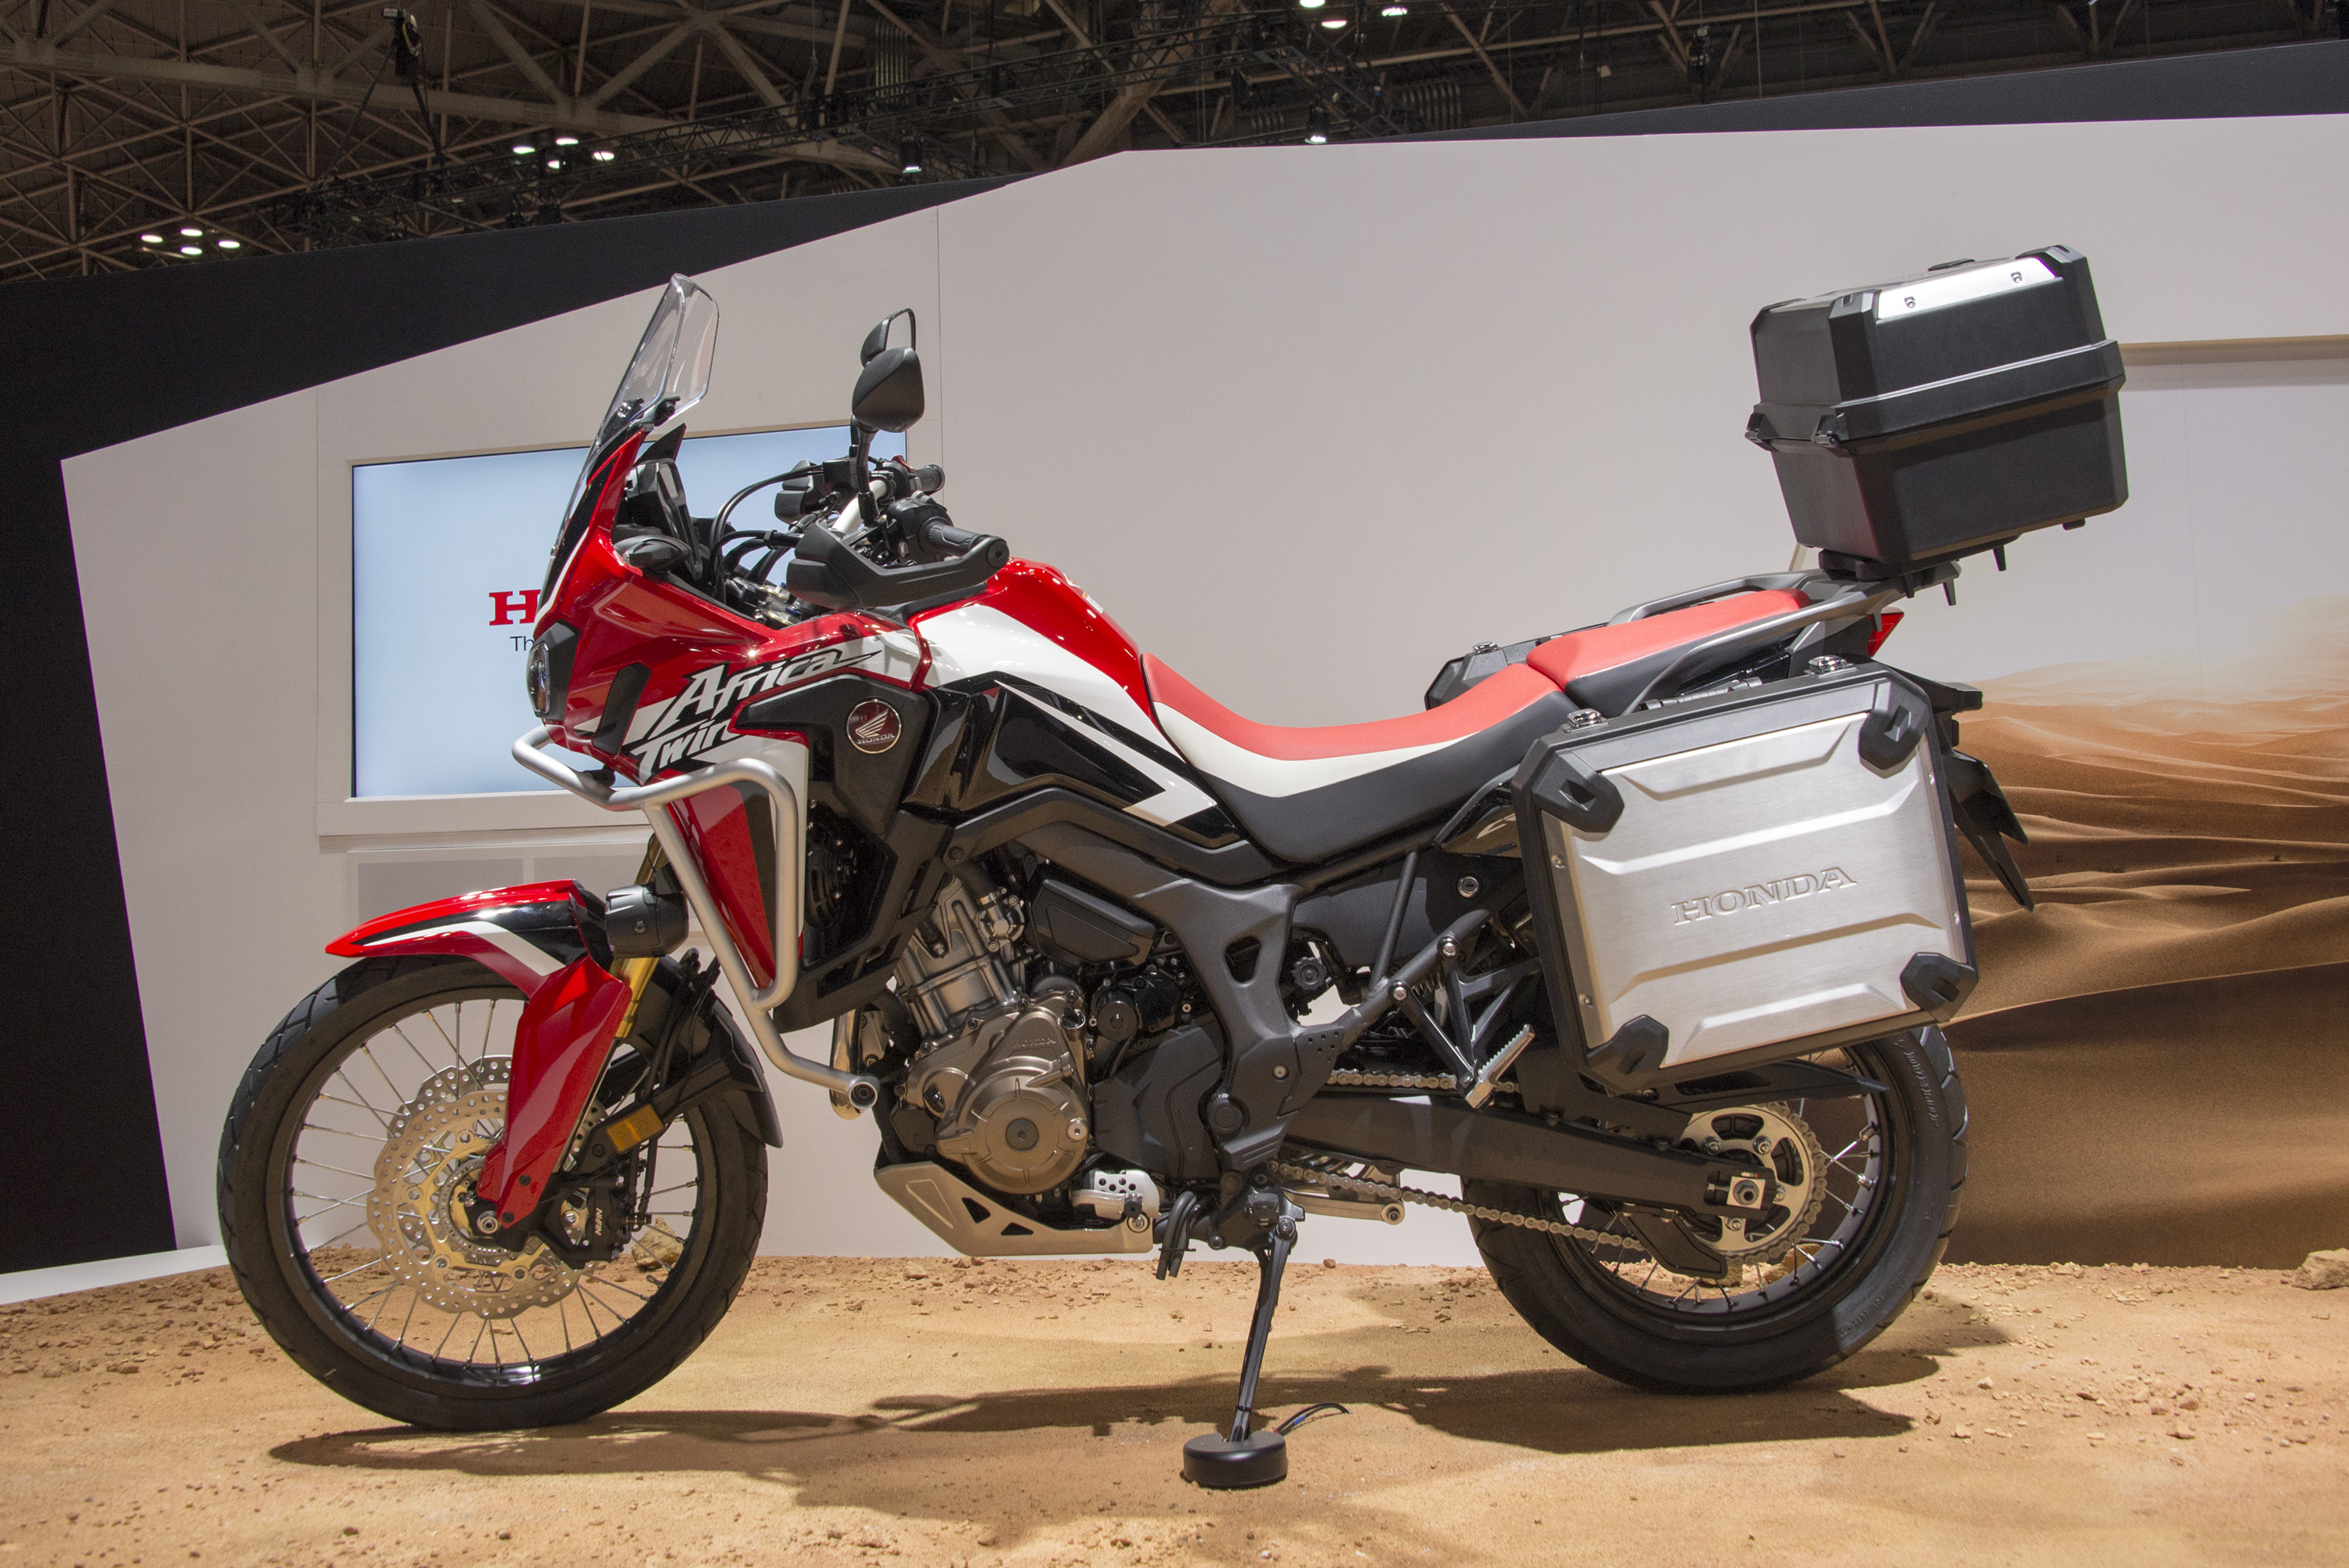 CRF1000L AfricaTwin_01